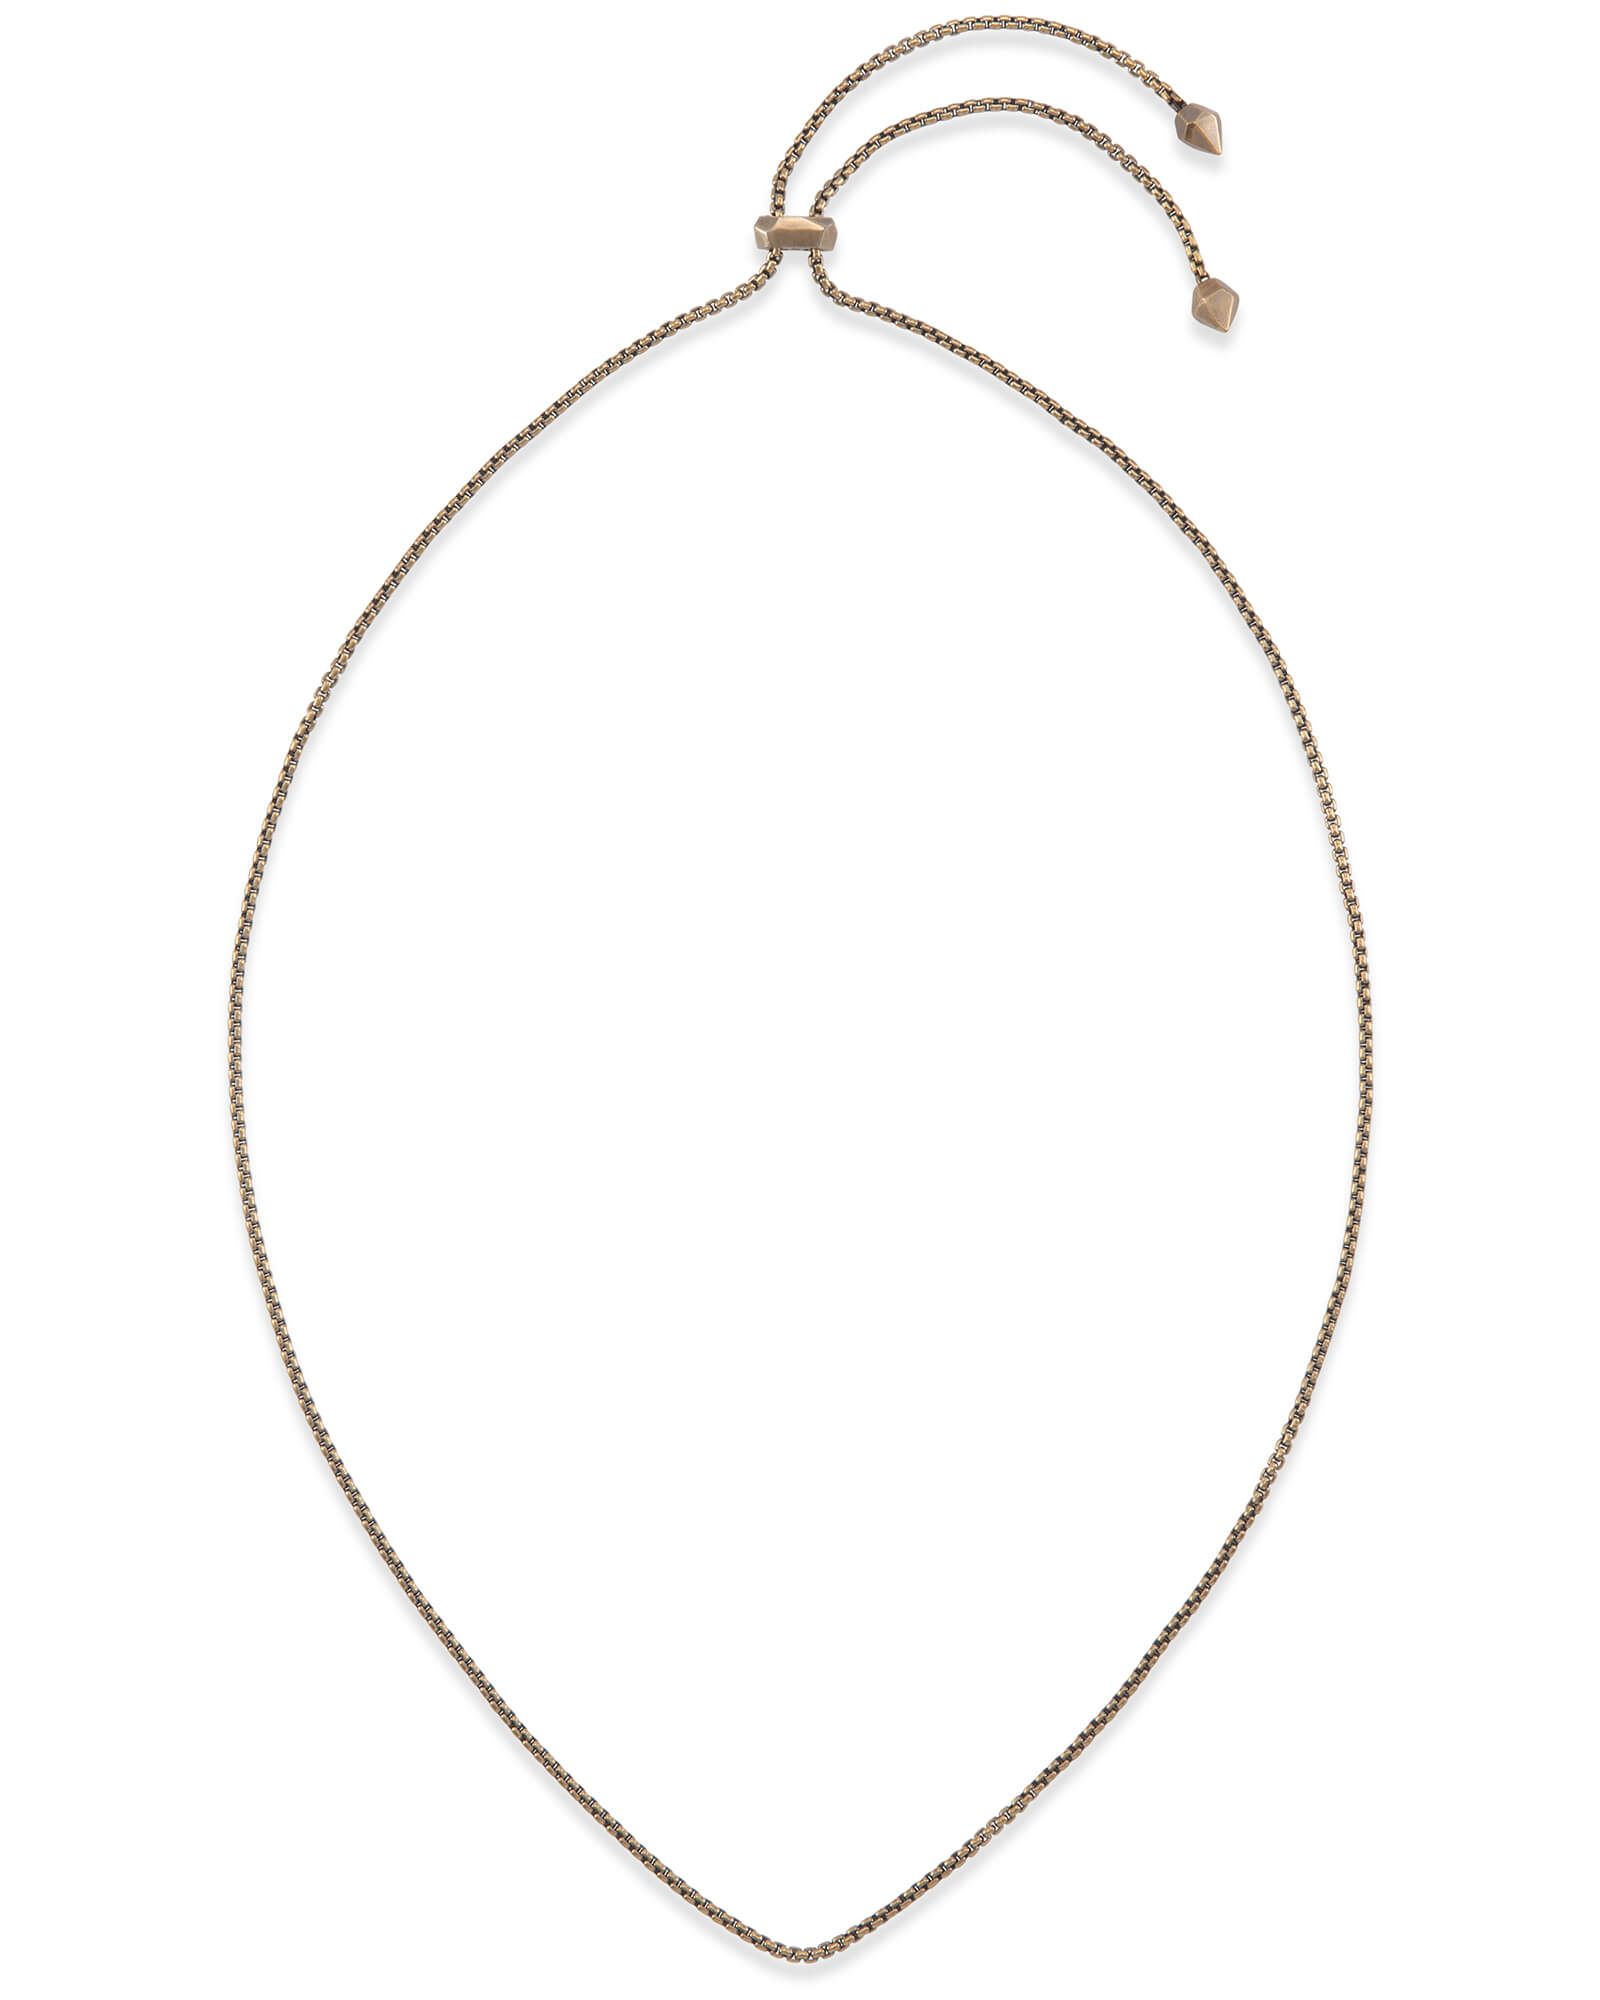 Adjustable Chain Necklace in Vintage Gold | Kendra Scott